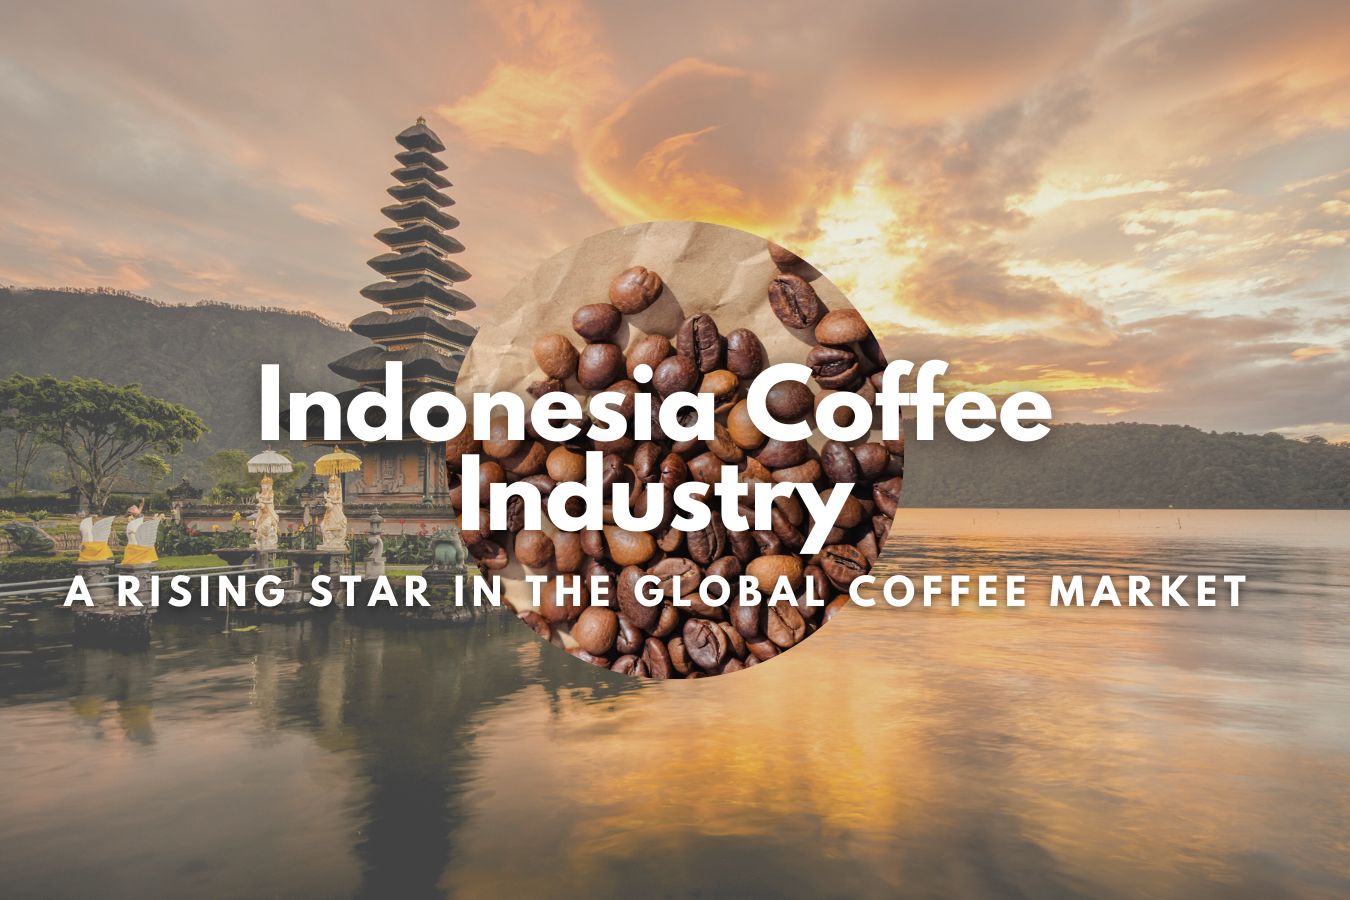 Indonesia Coffee Industry A Rising Star in the Global Coffee Market